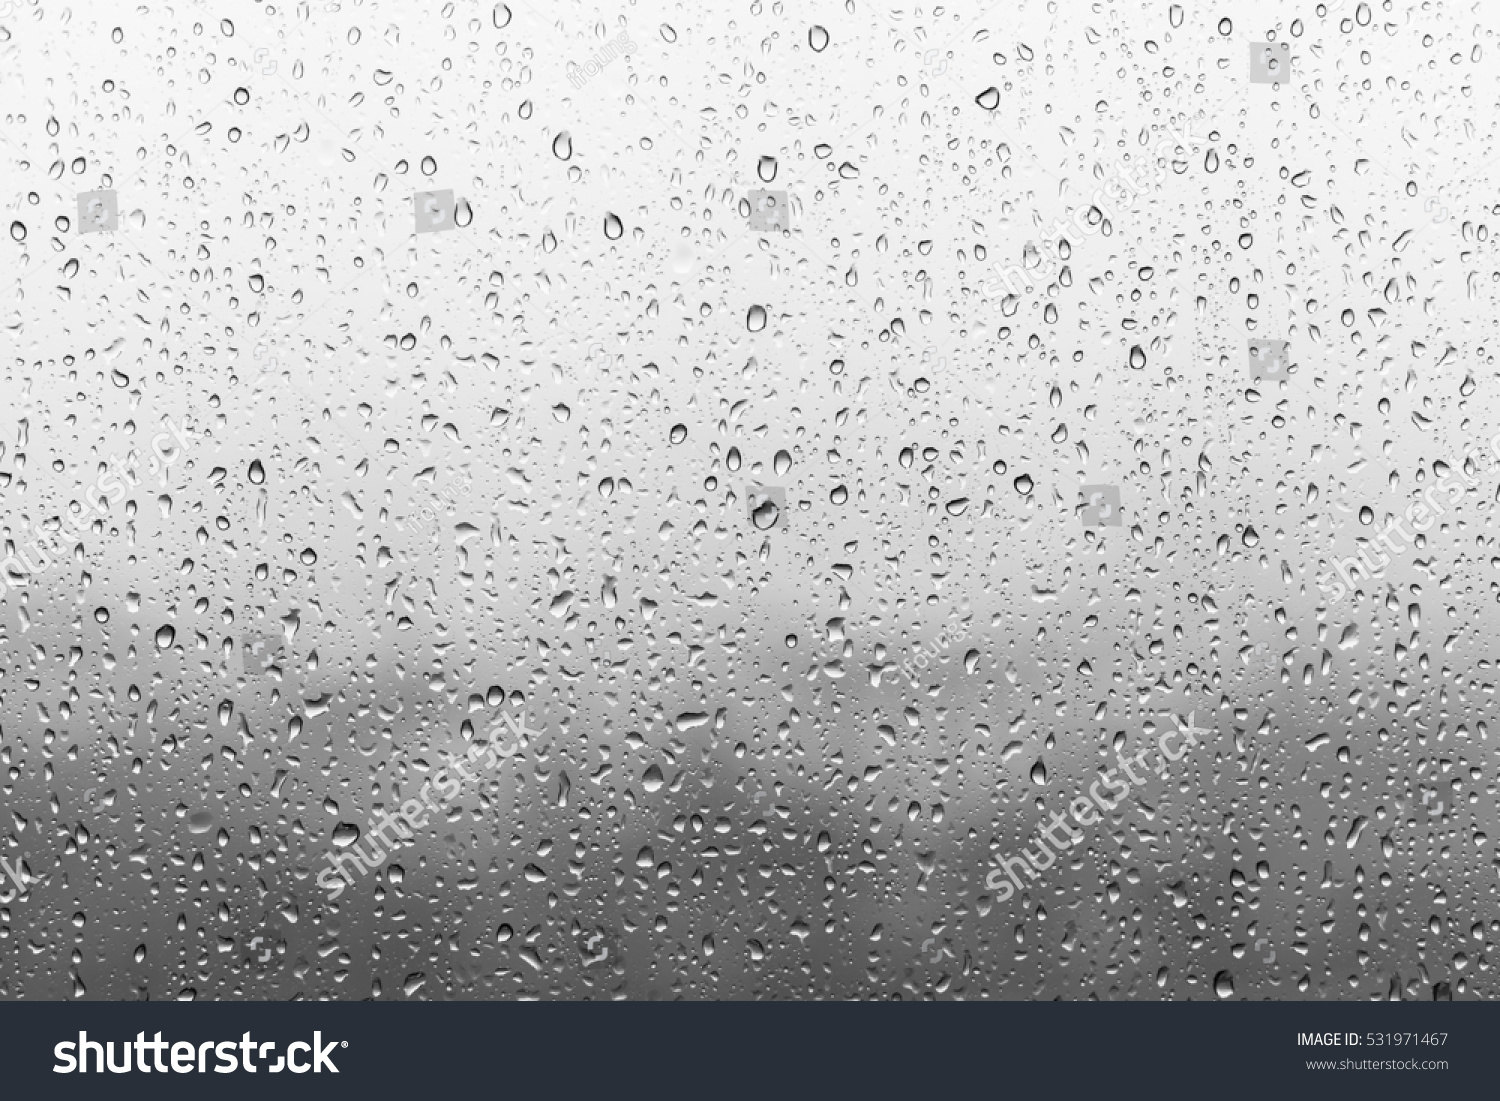 Rain drops on window glasses surface with cloudy background . Natural Pattern of raindrops isolated on cloudy background. #531971467